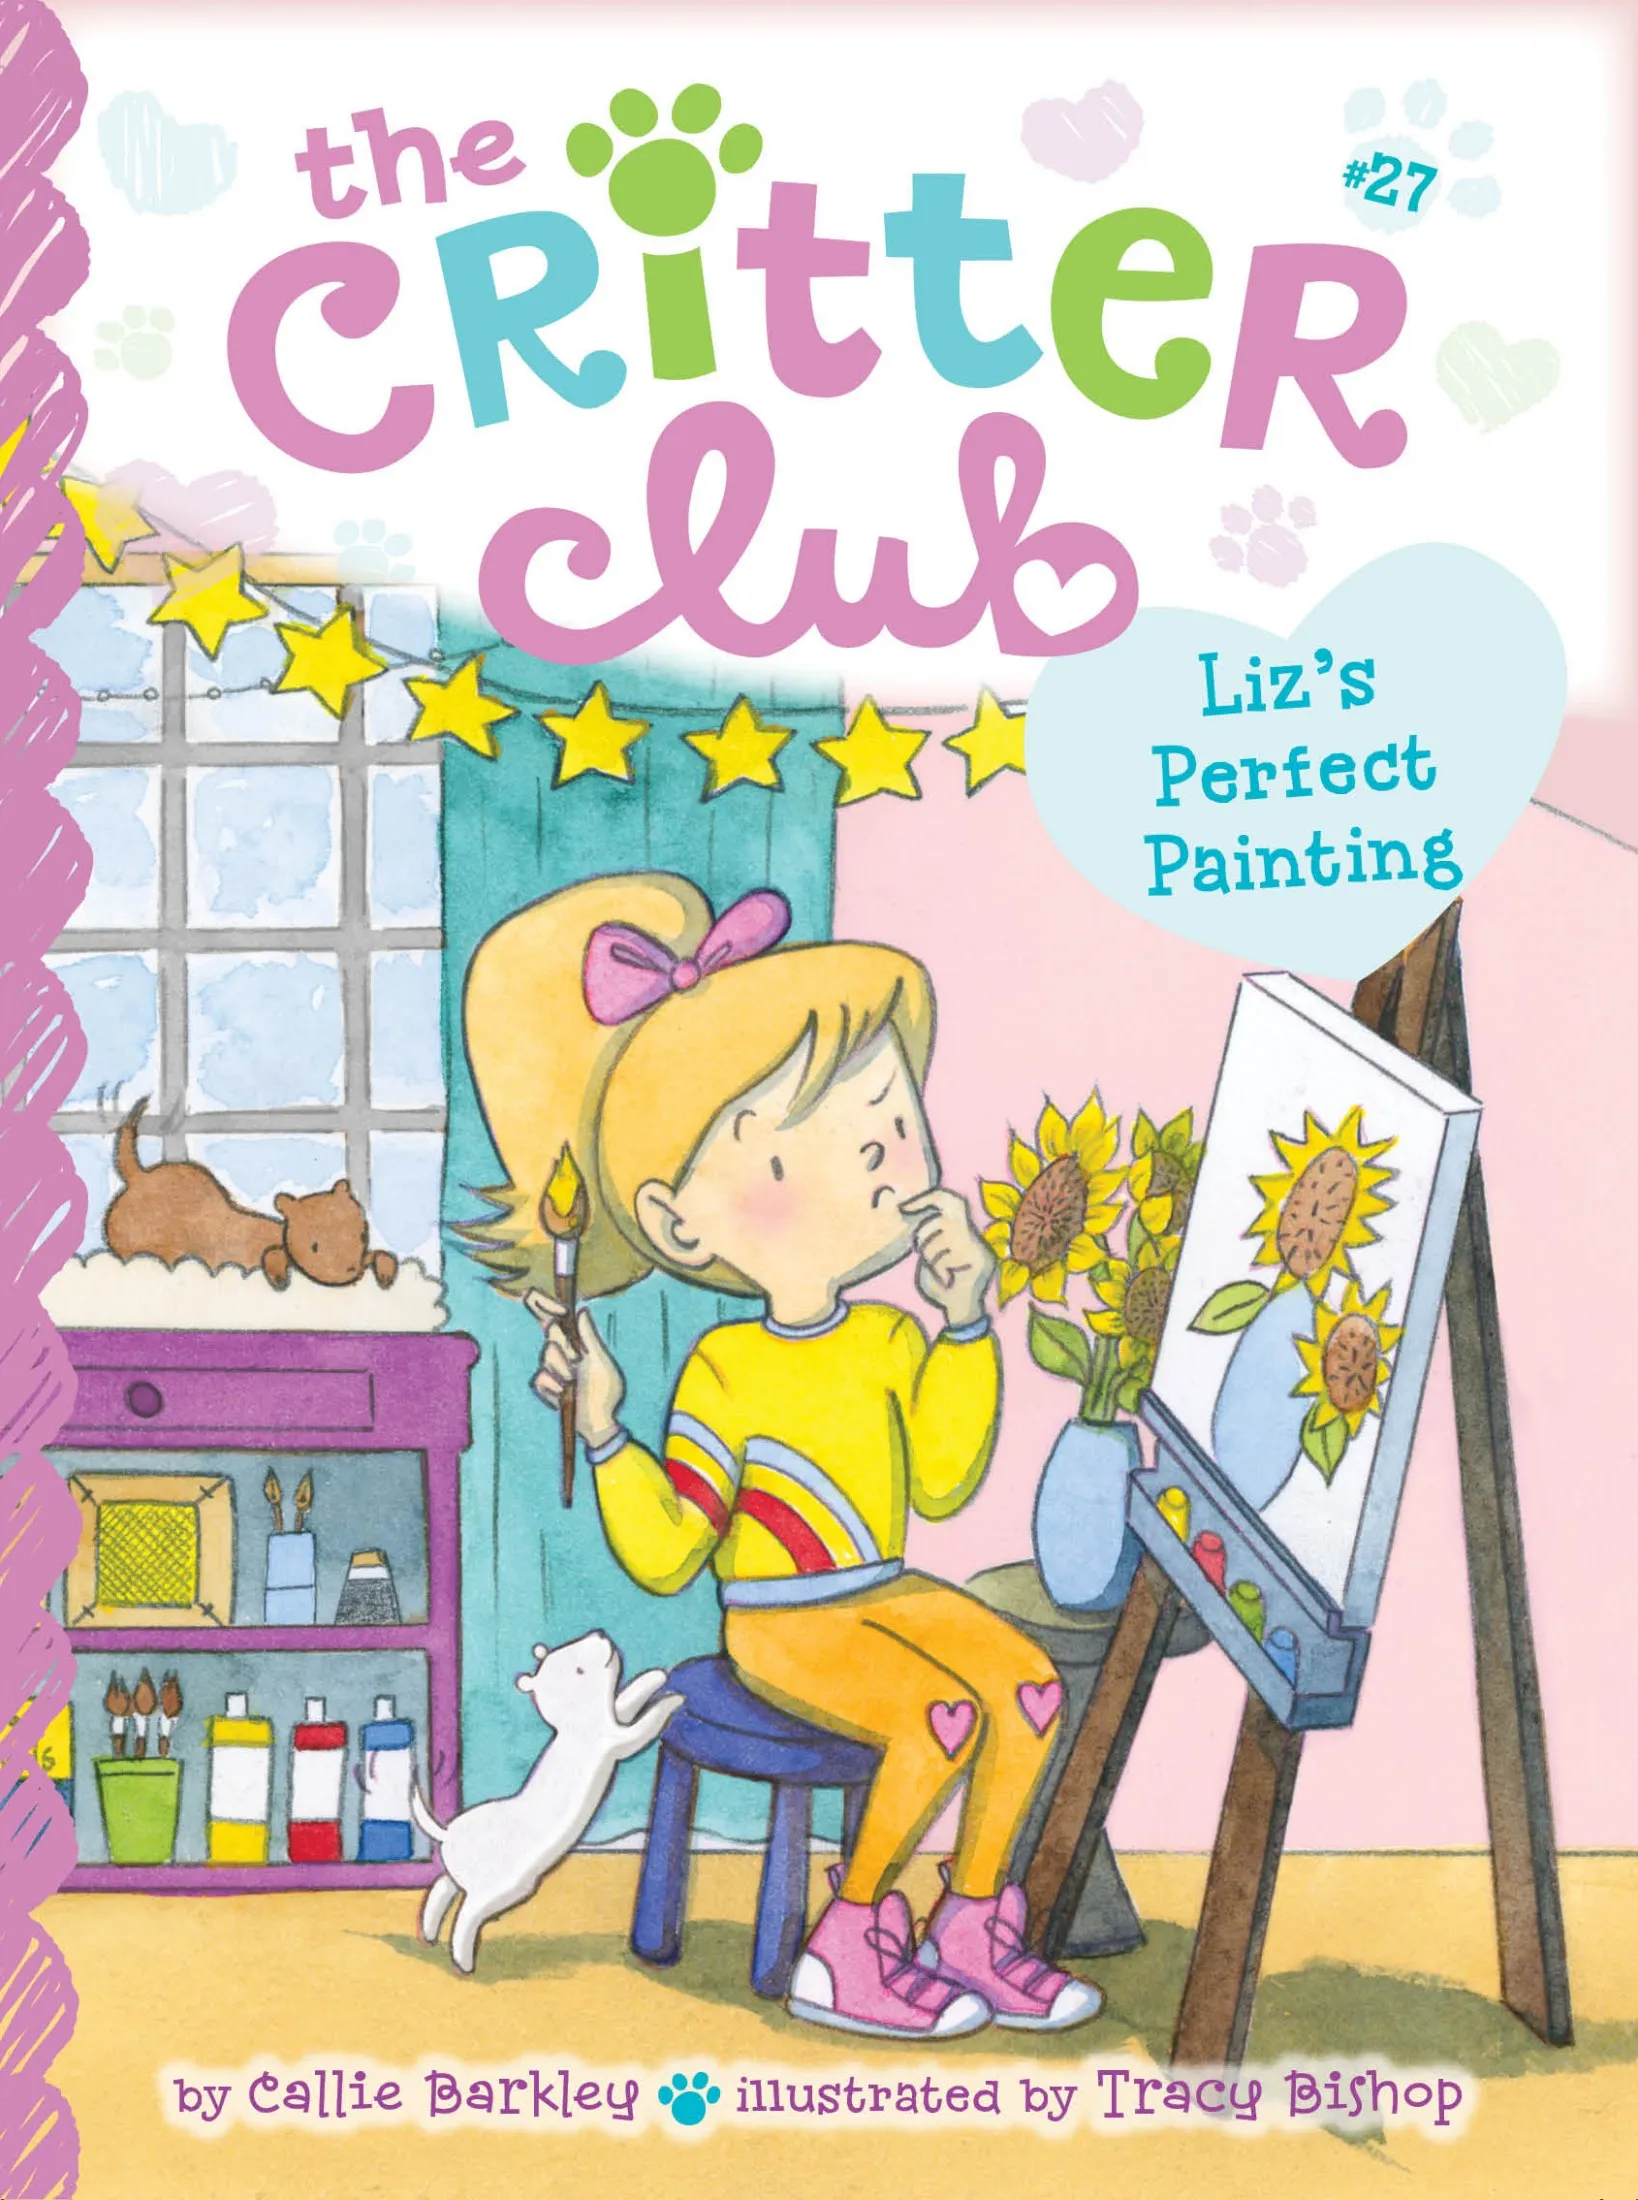 Liz's Perfect Painting (The Critter Club #27)